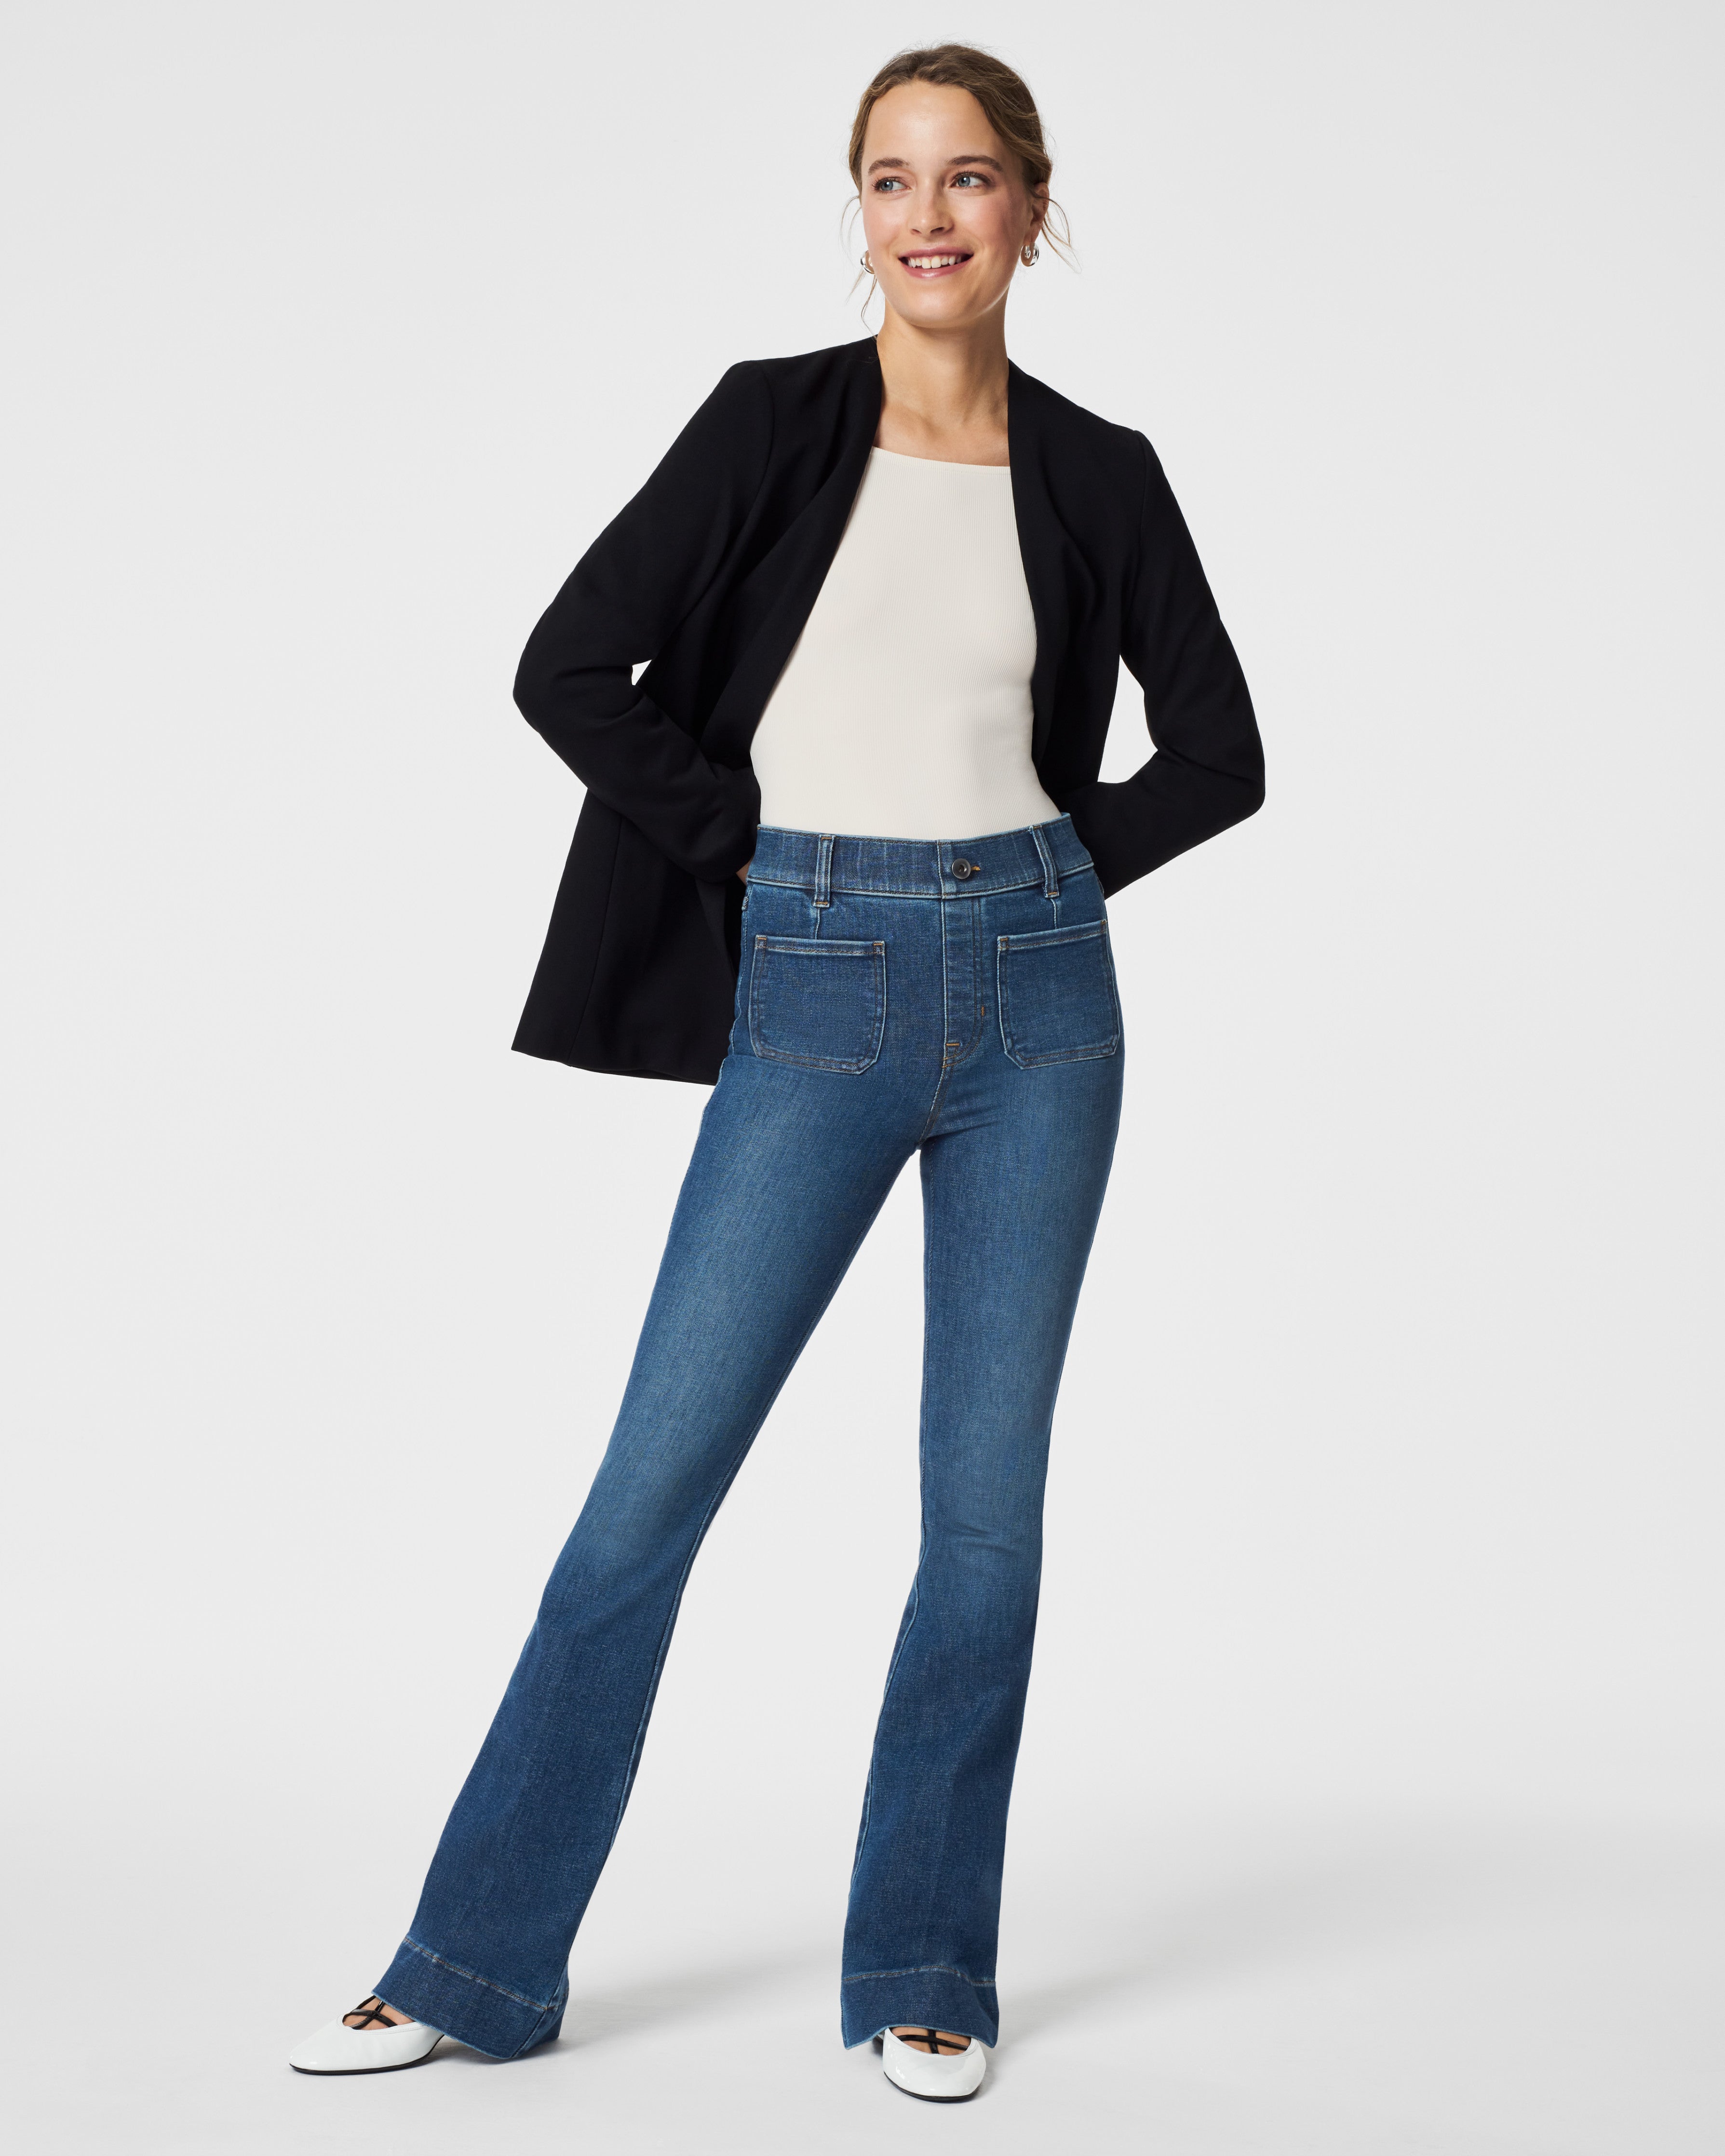 Spanx NWT Seamed Front Wide Leg Jeans - Size 1X Petite – Chic